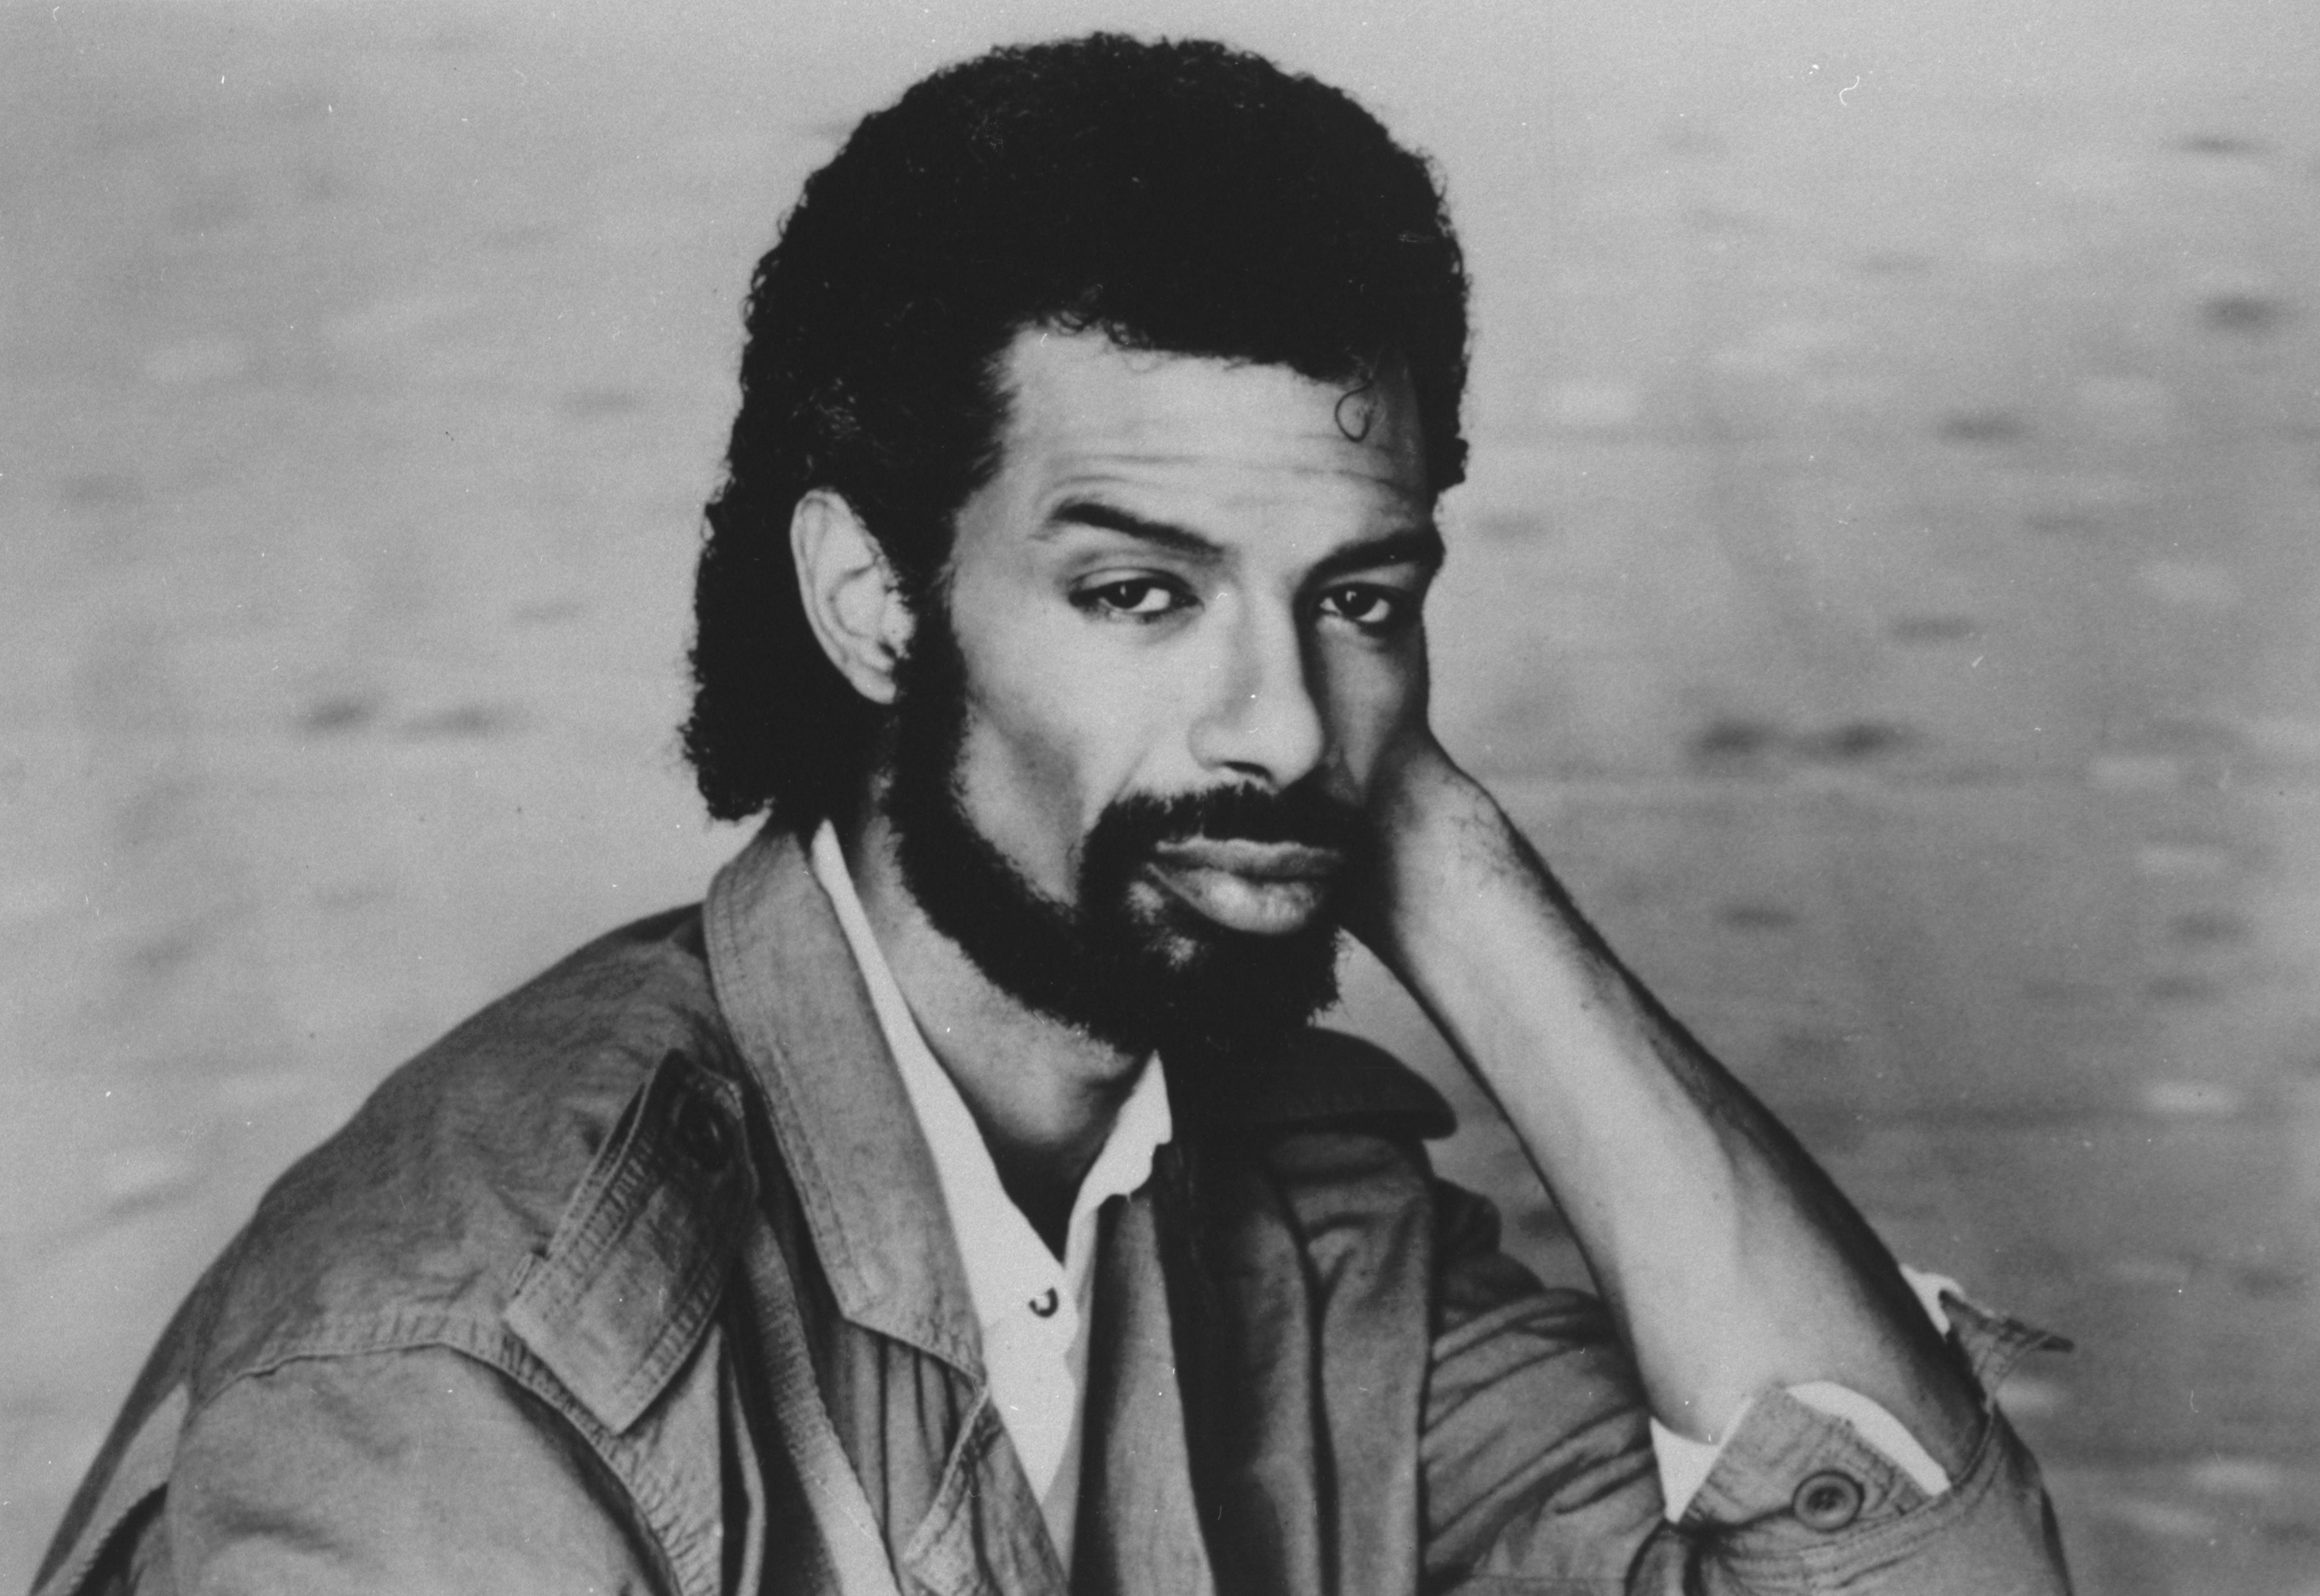 FILE - In the Sept. 1984 file photo, musician Gil Scott-Heron poses. Scott-Heron, who helped lay the groundwork for rap by fusing minimalistic percussion, political expression and spoken-word poetry on songs such as "The Revolution Will Not Be Televised" but saw his brilliance undermined by a years-long drug addiction, died Friday, May, 27, 2011 at age 62. (AP Photo, File)